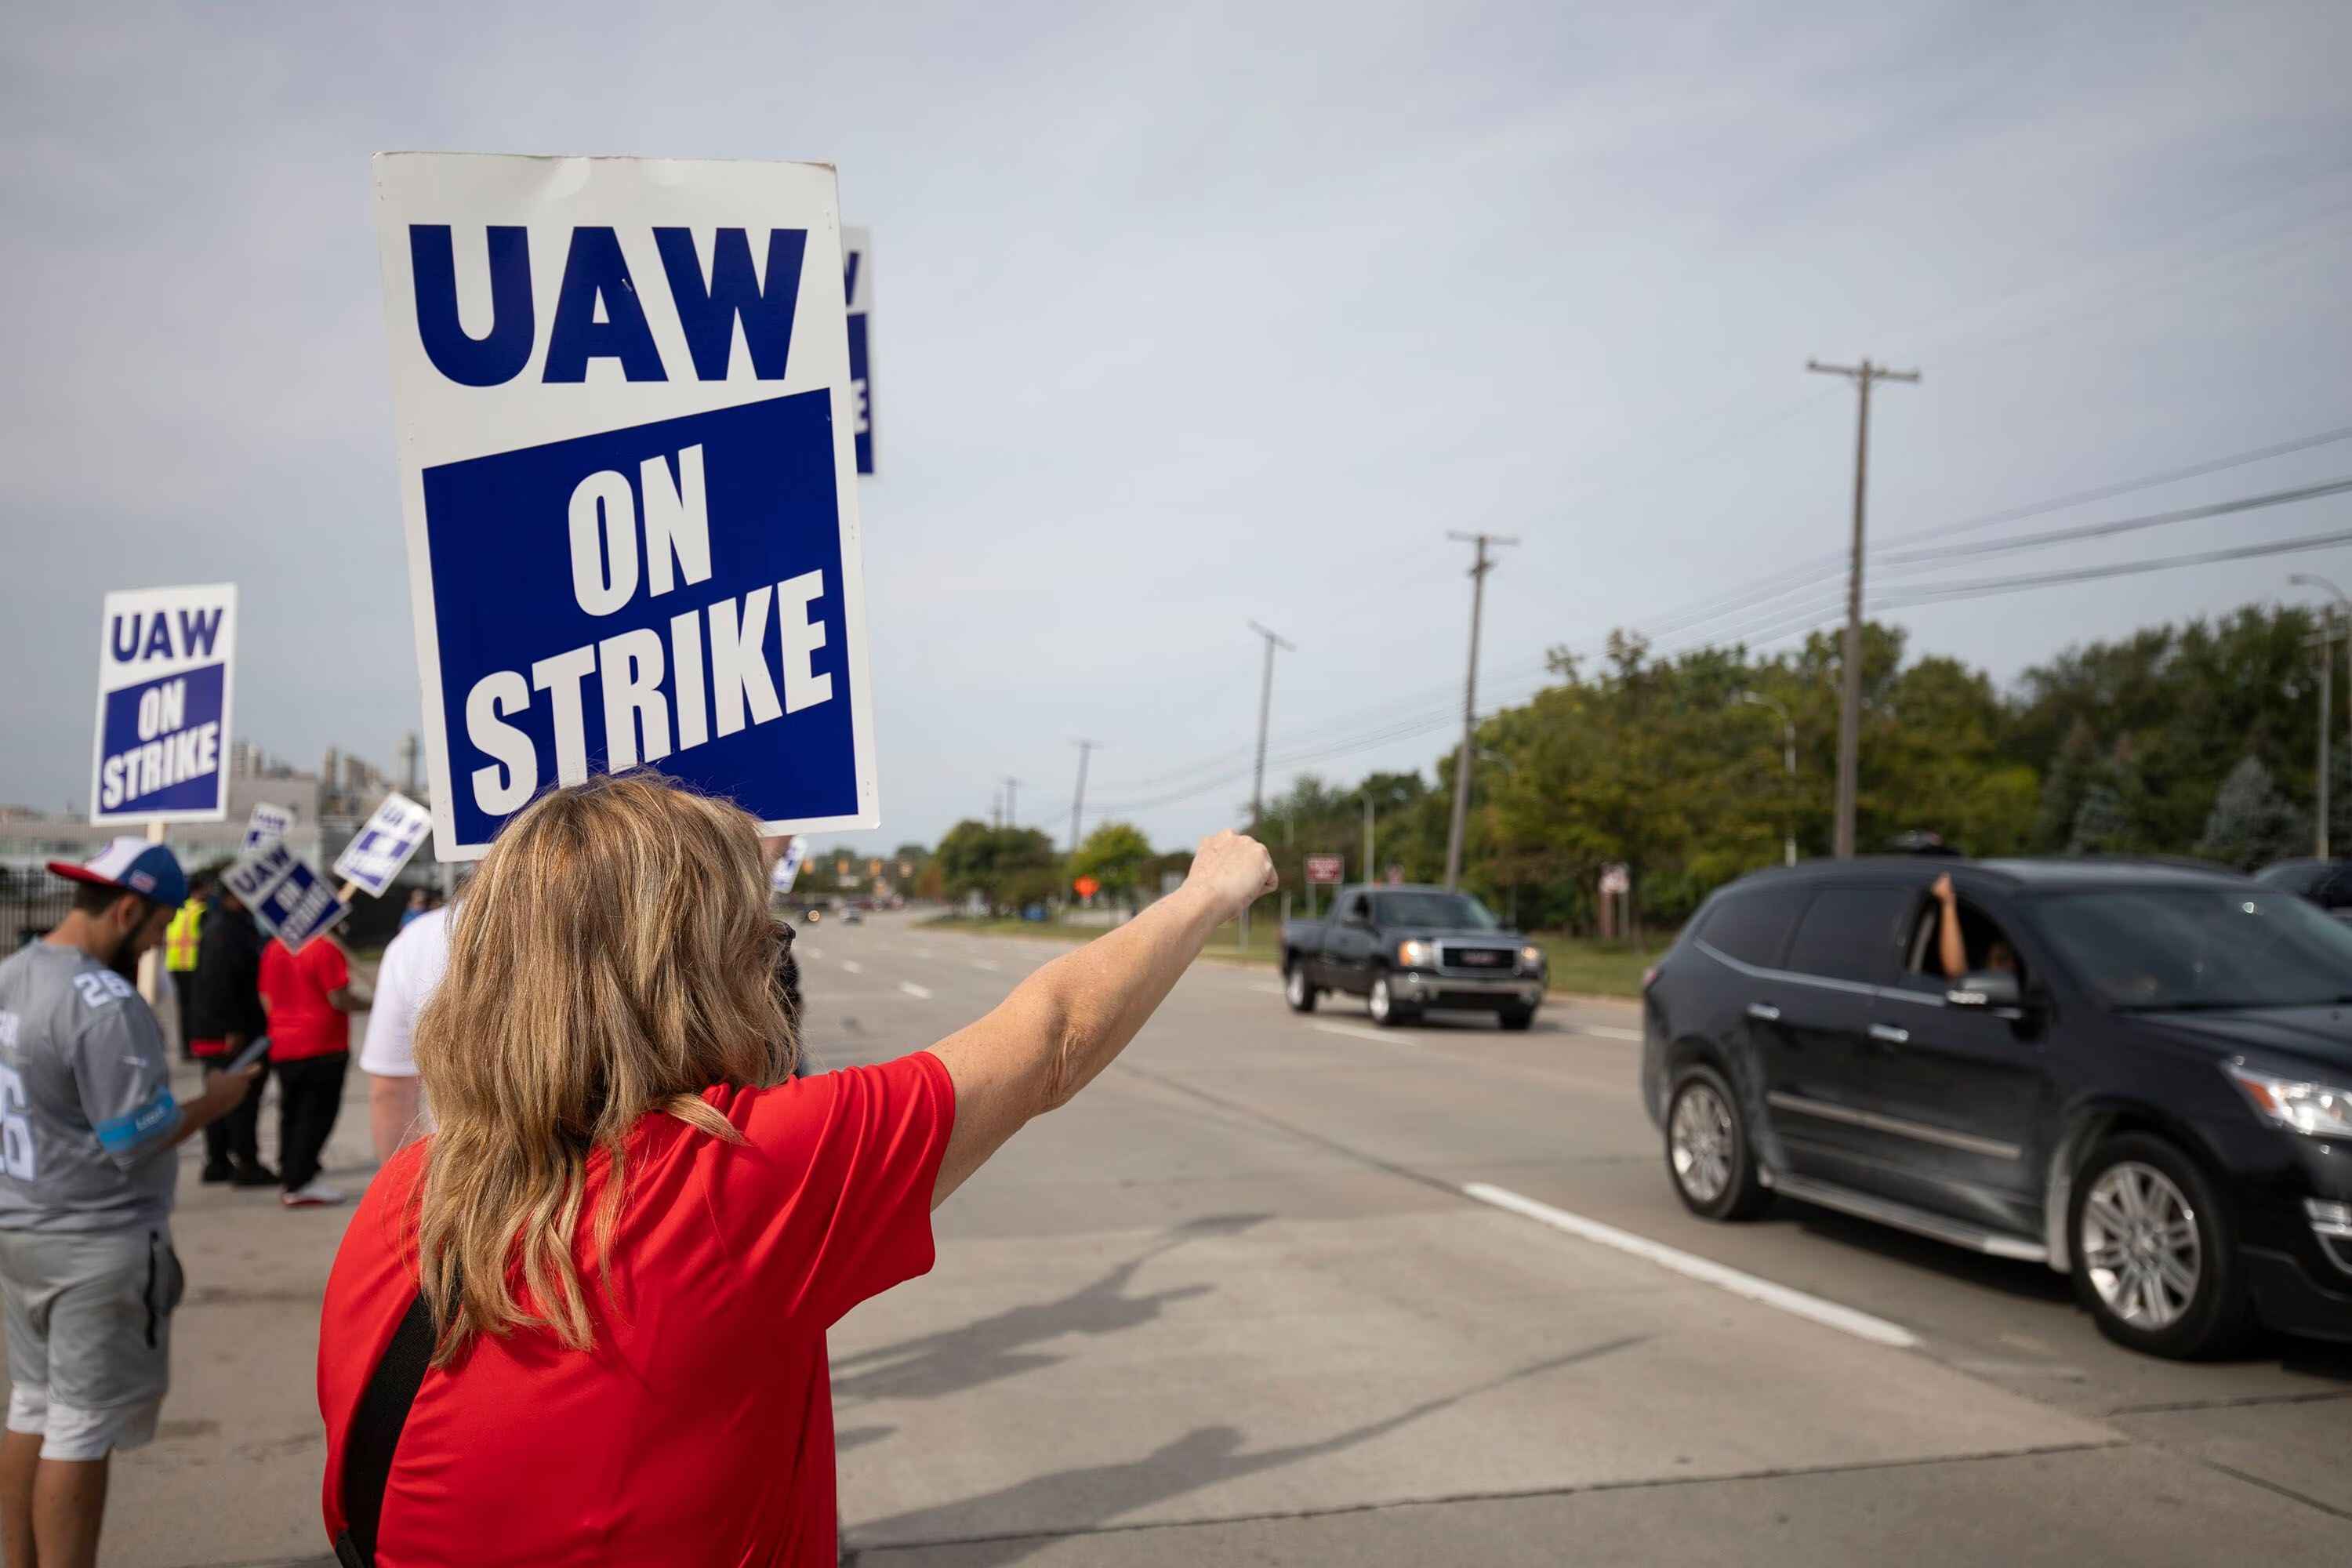 New Development In UAW Strike Could Impact EV Production And Prices